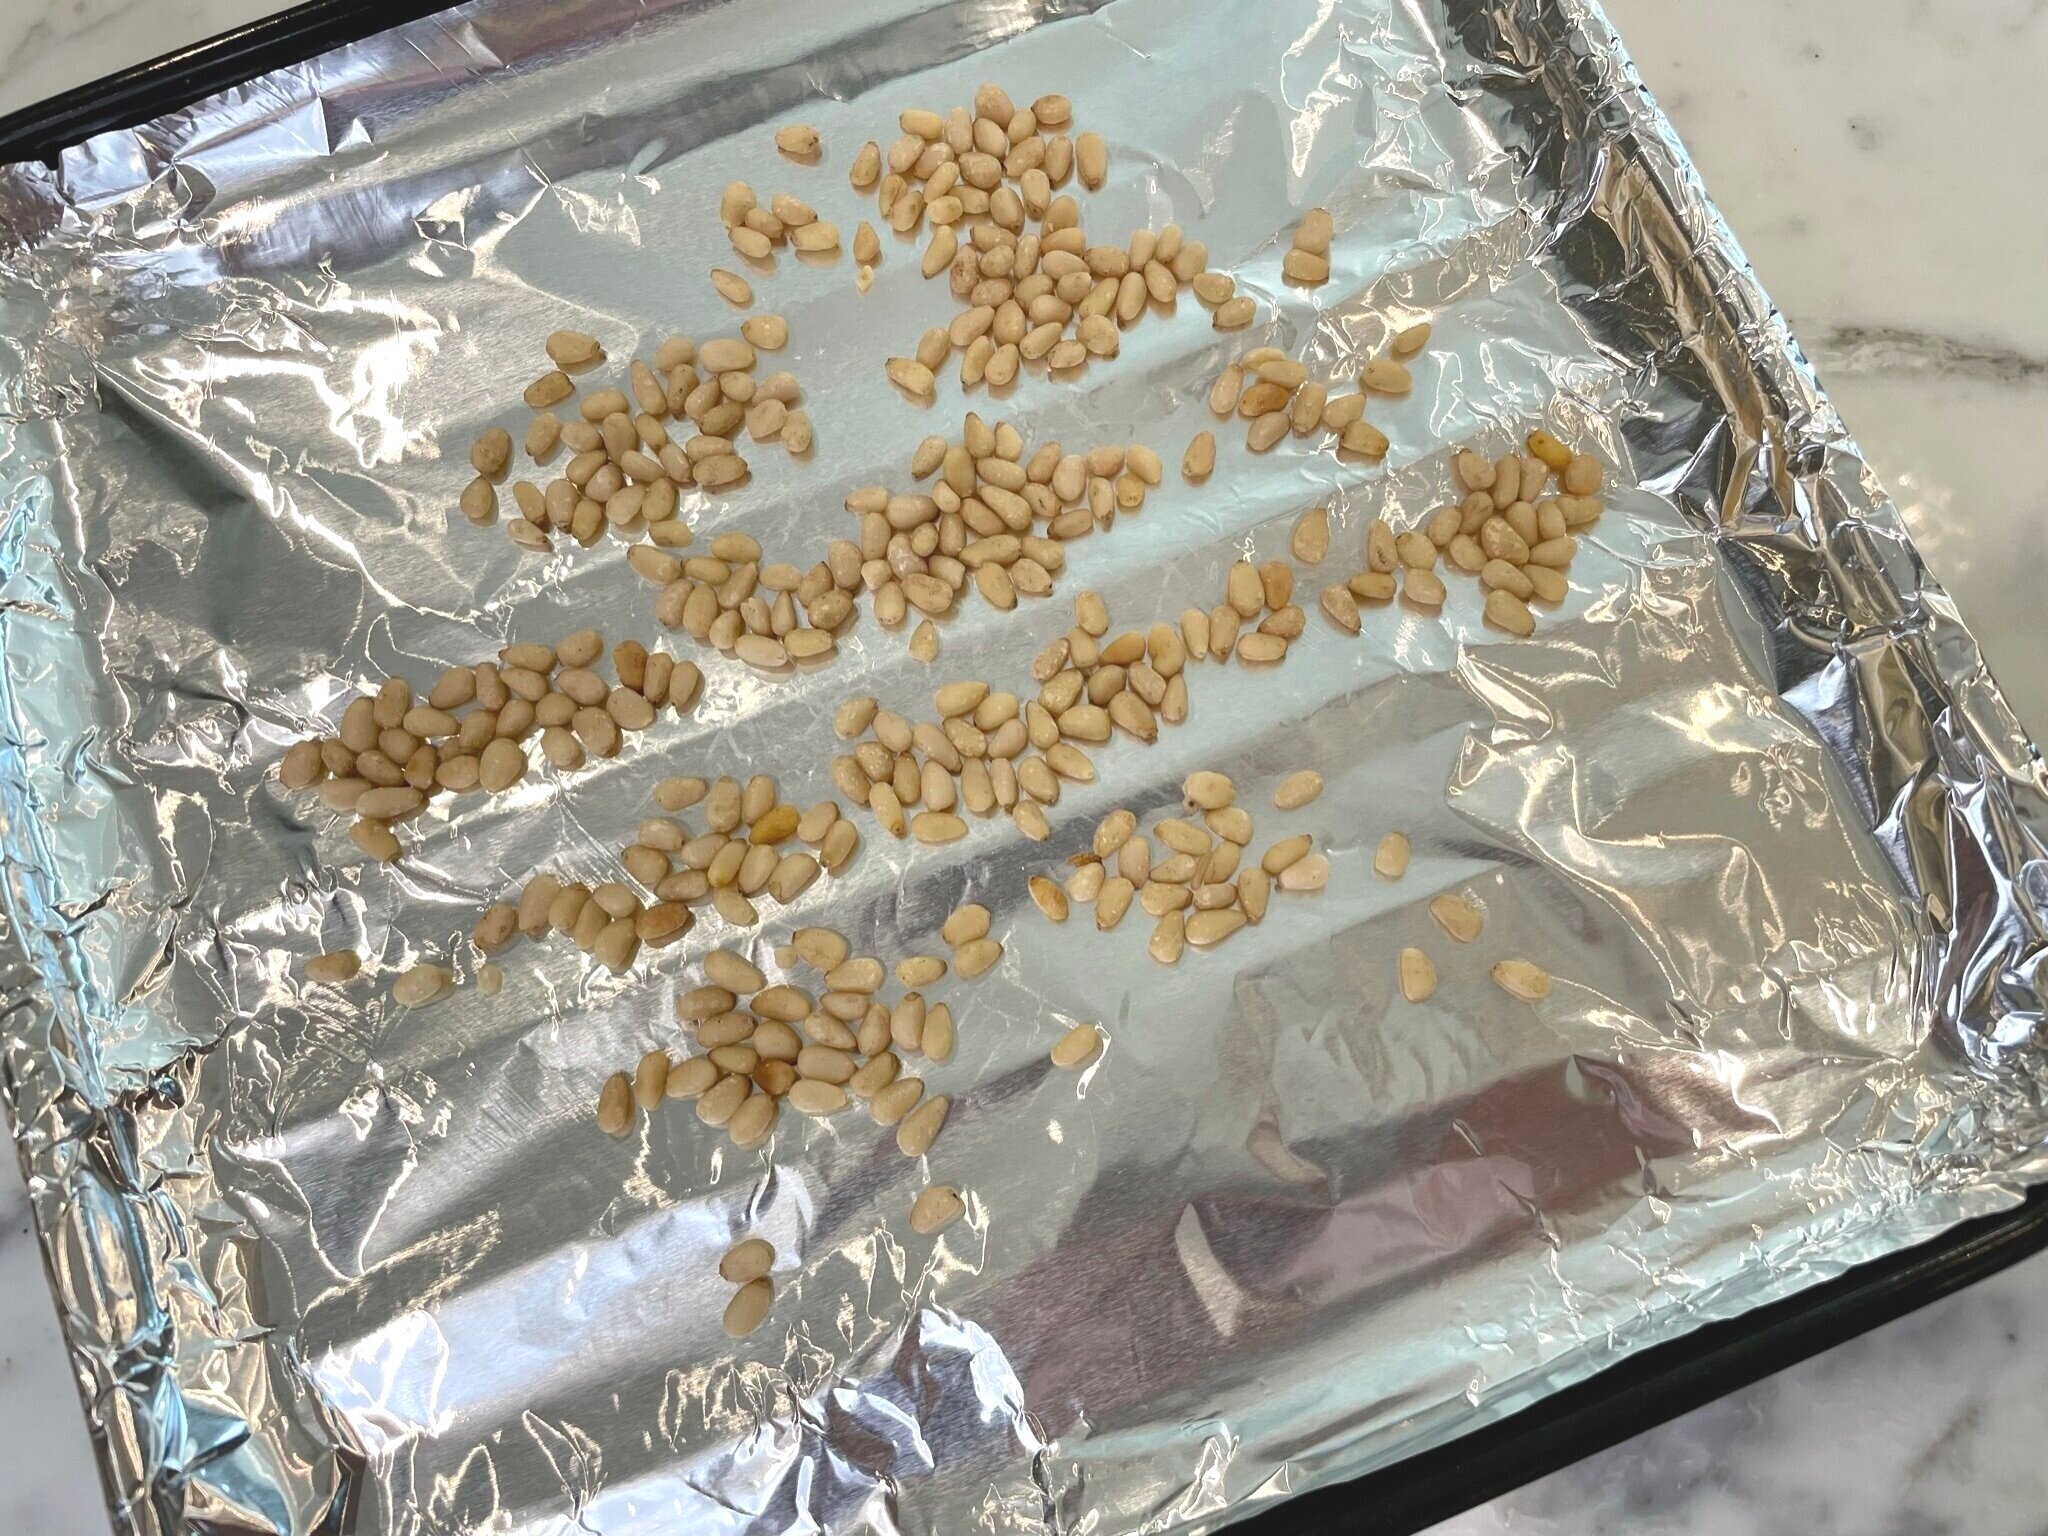 Spread pine nuts on baking pan.